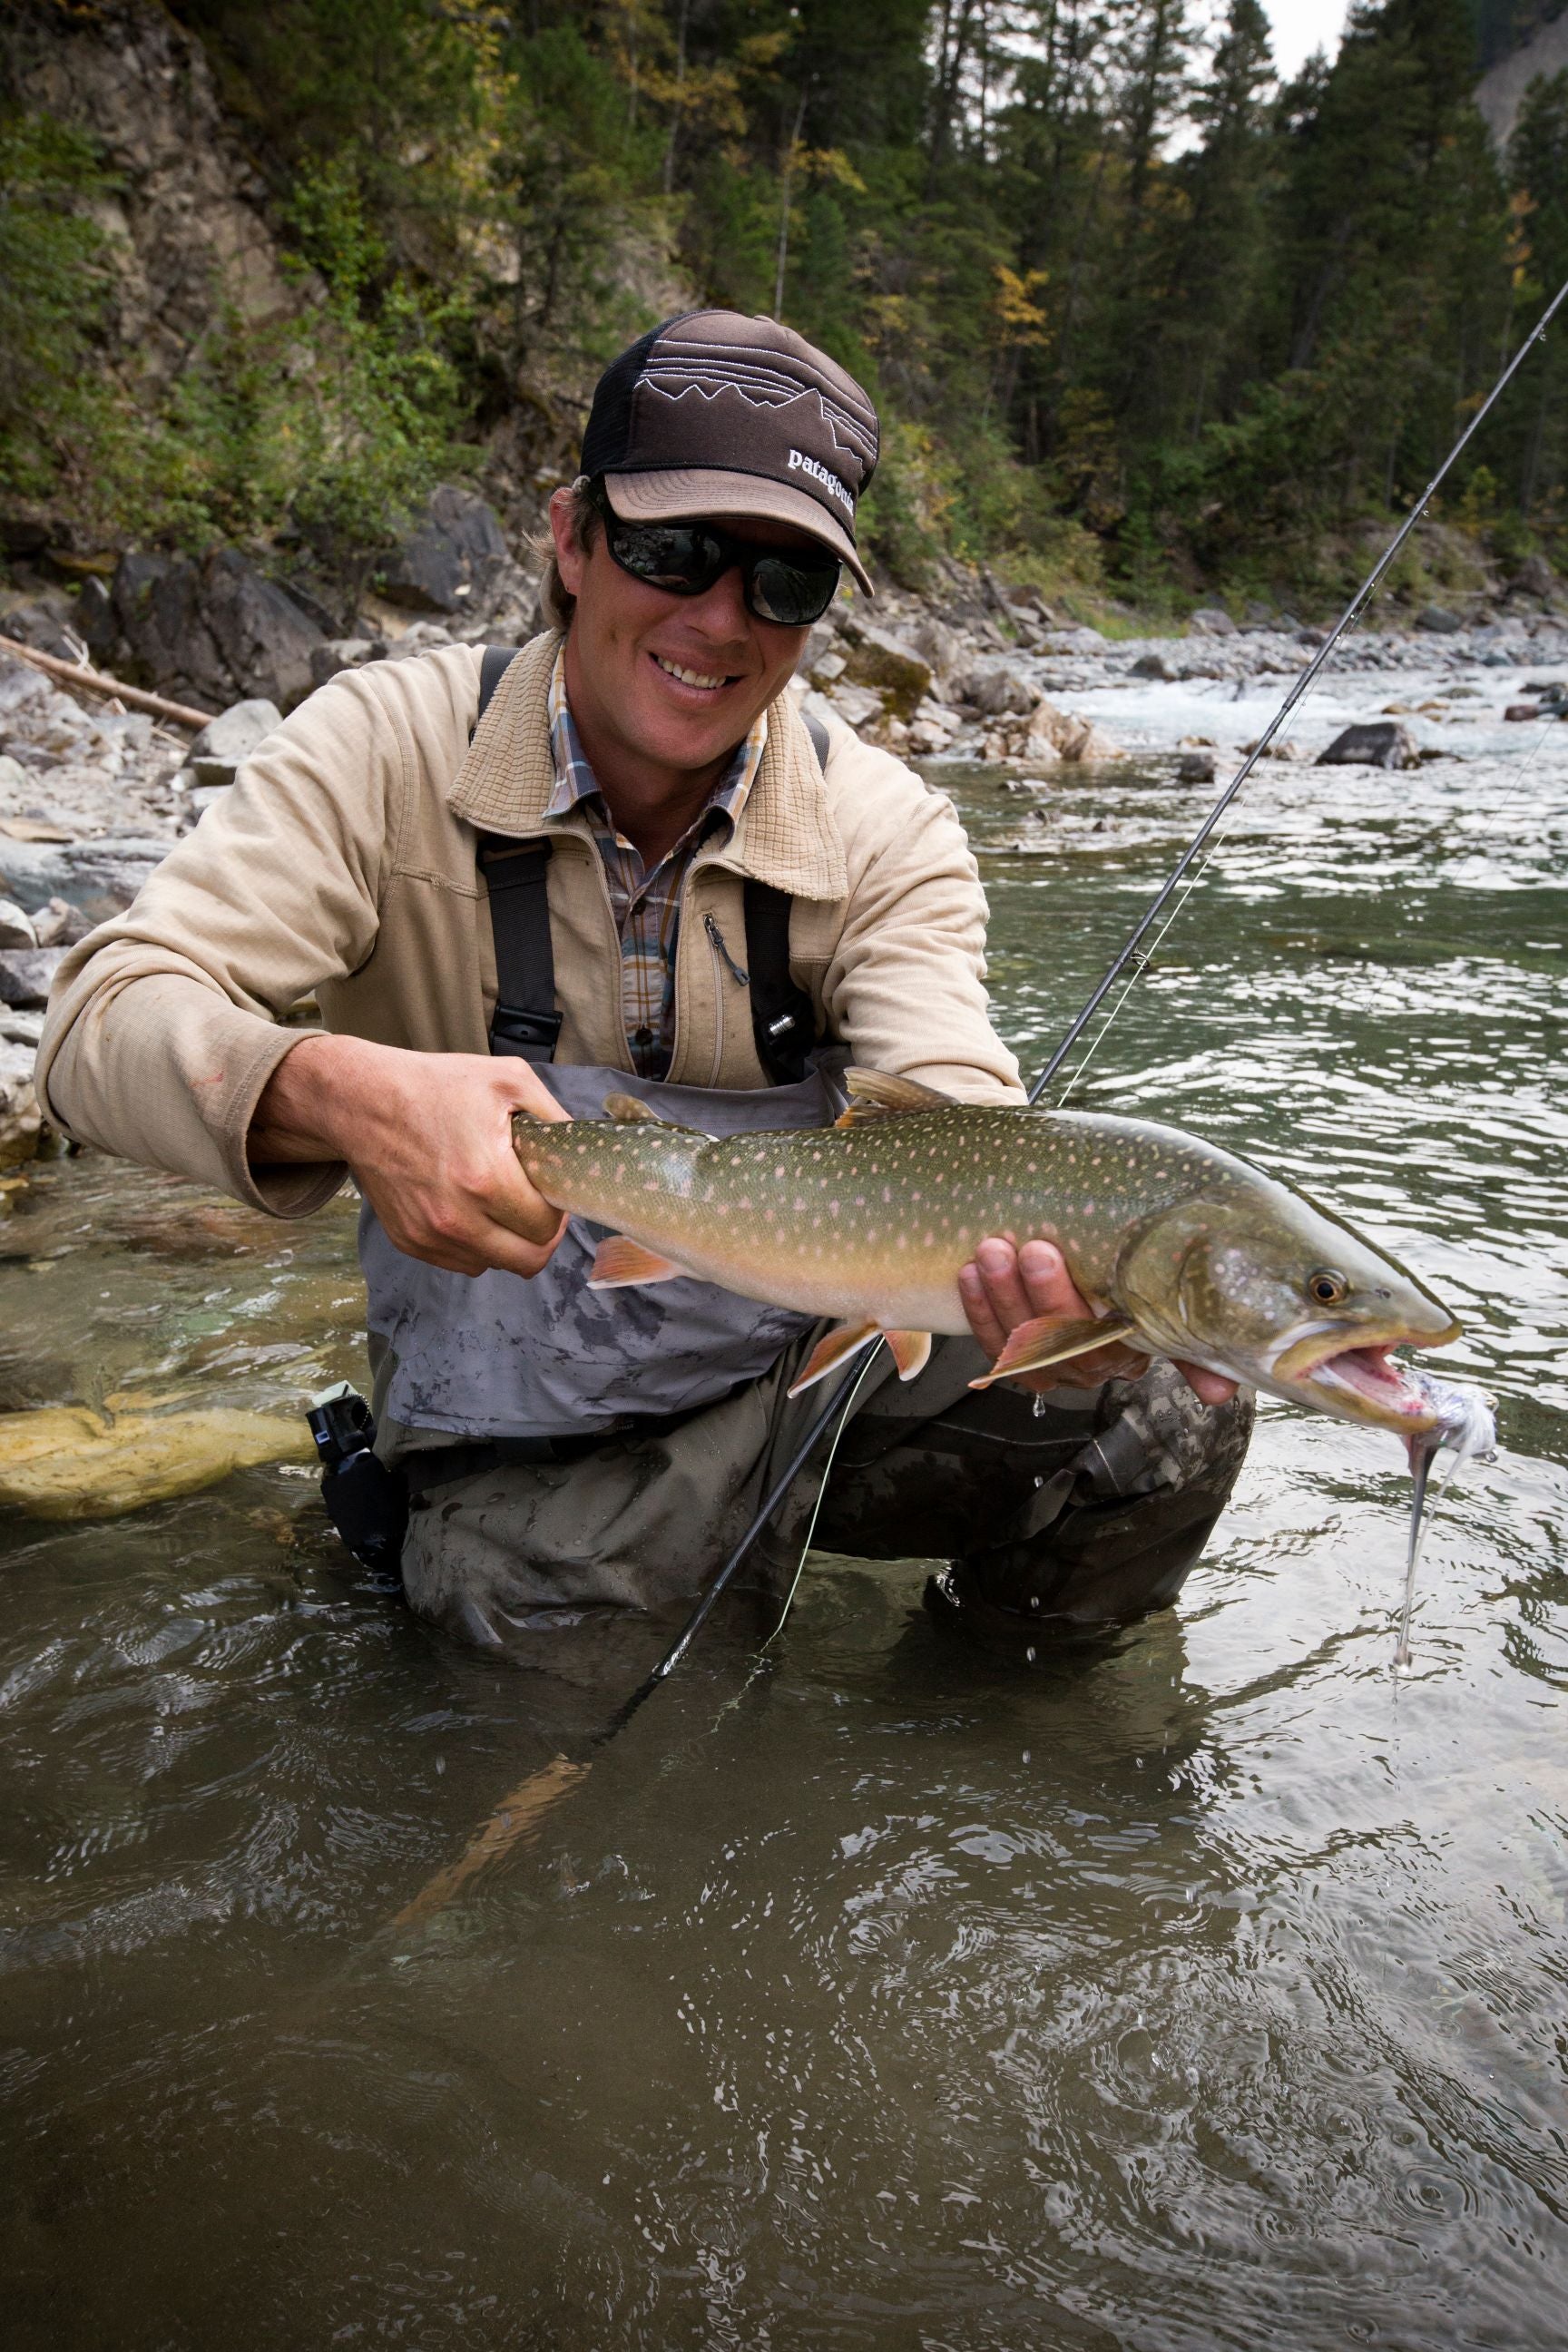 Learn to fly fish like a pro at Owen River Lodge's Fly Fishing school -  Owen River Lodge NZ